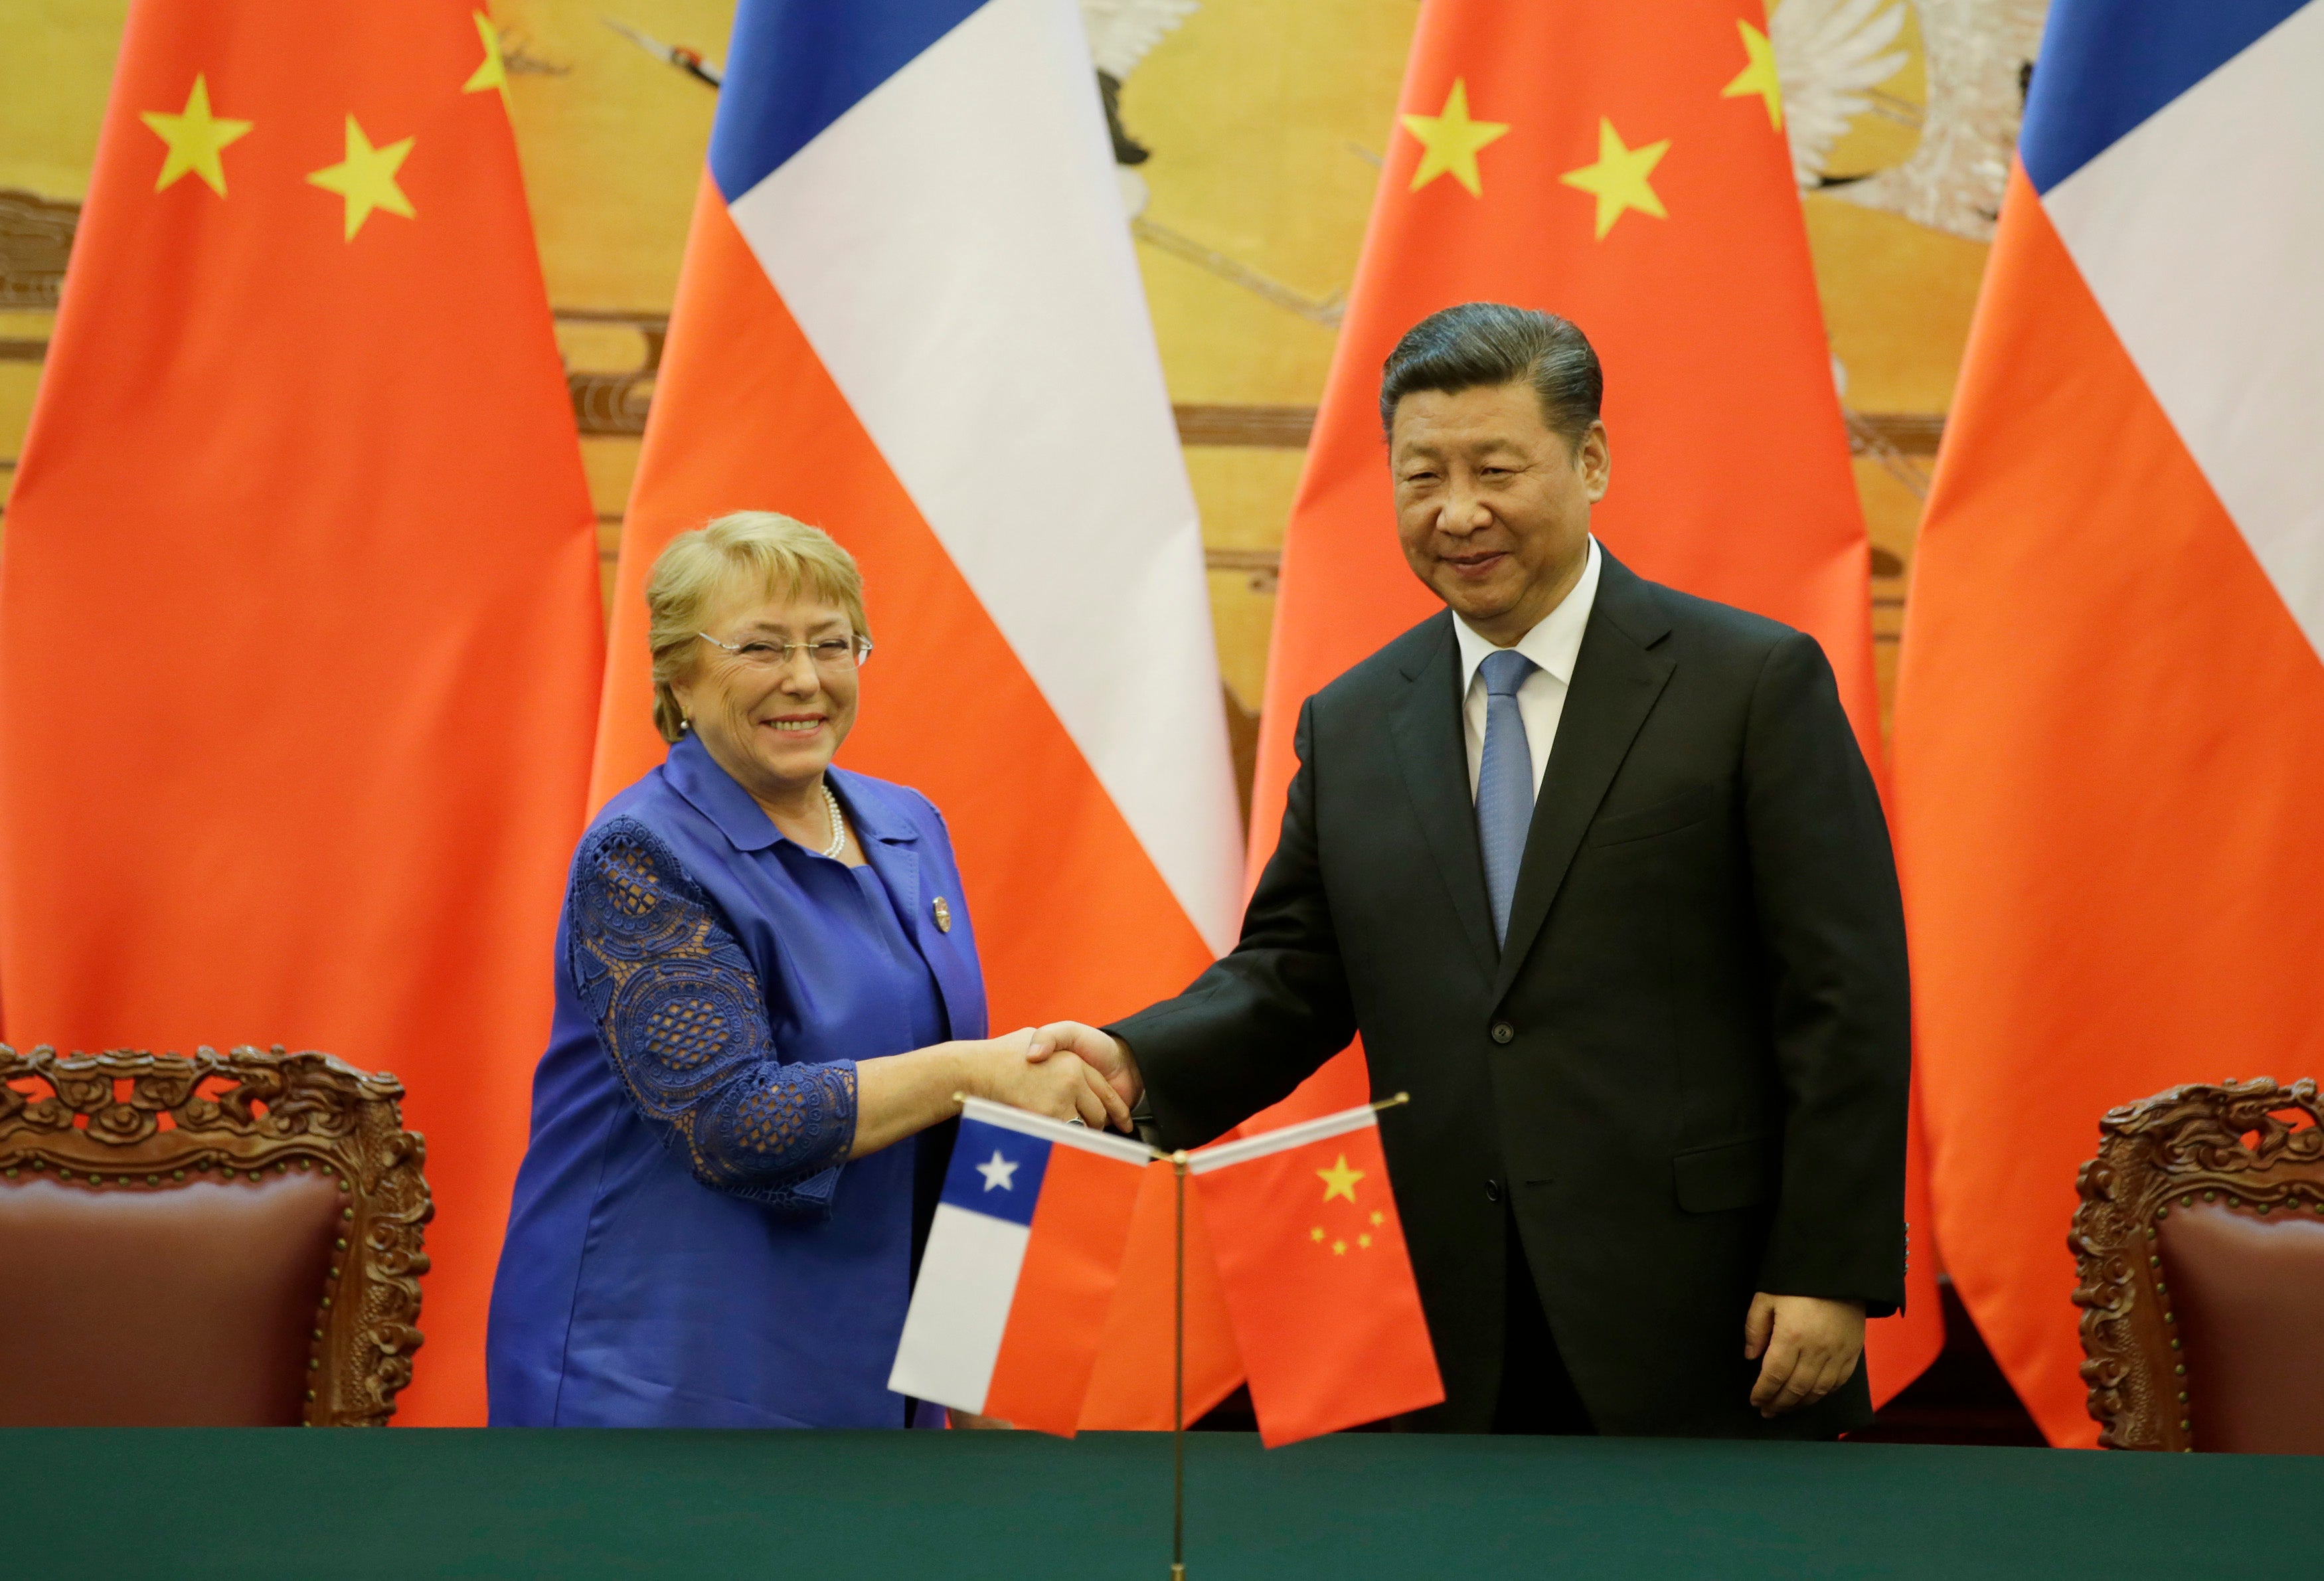 Former Chilean President Michelle Bachelet (L) and Chinese President Xi Jinping attend a signing ceremony ahead of the Belt and Road Forum in Beijing, China in 2017